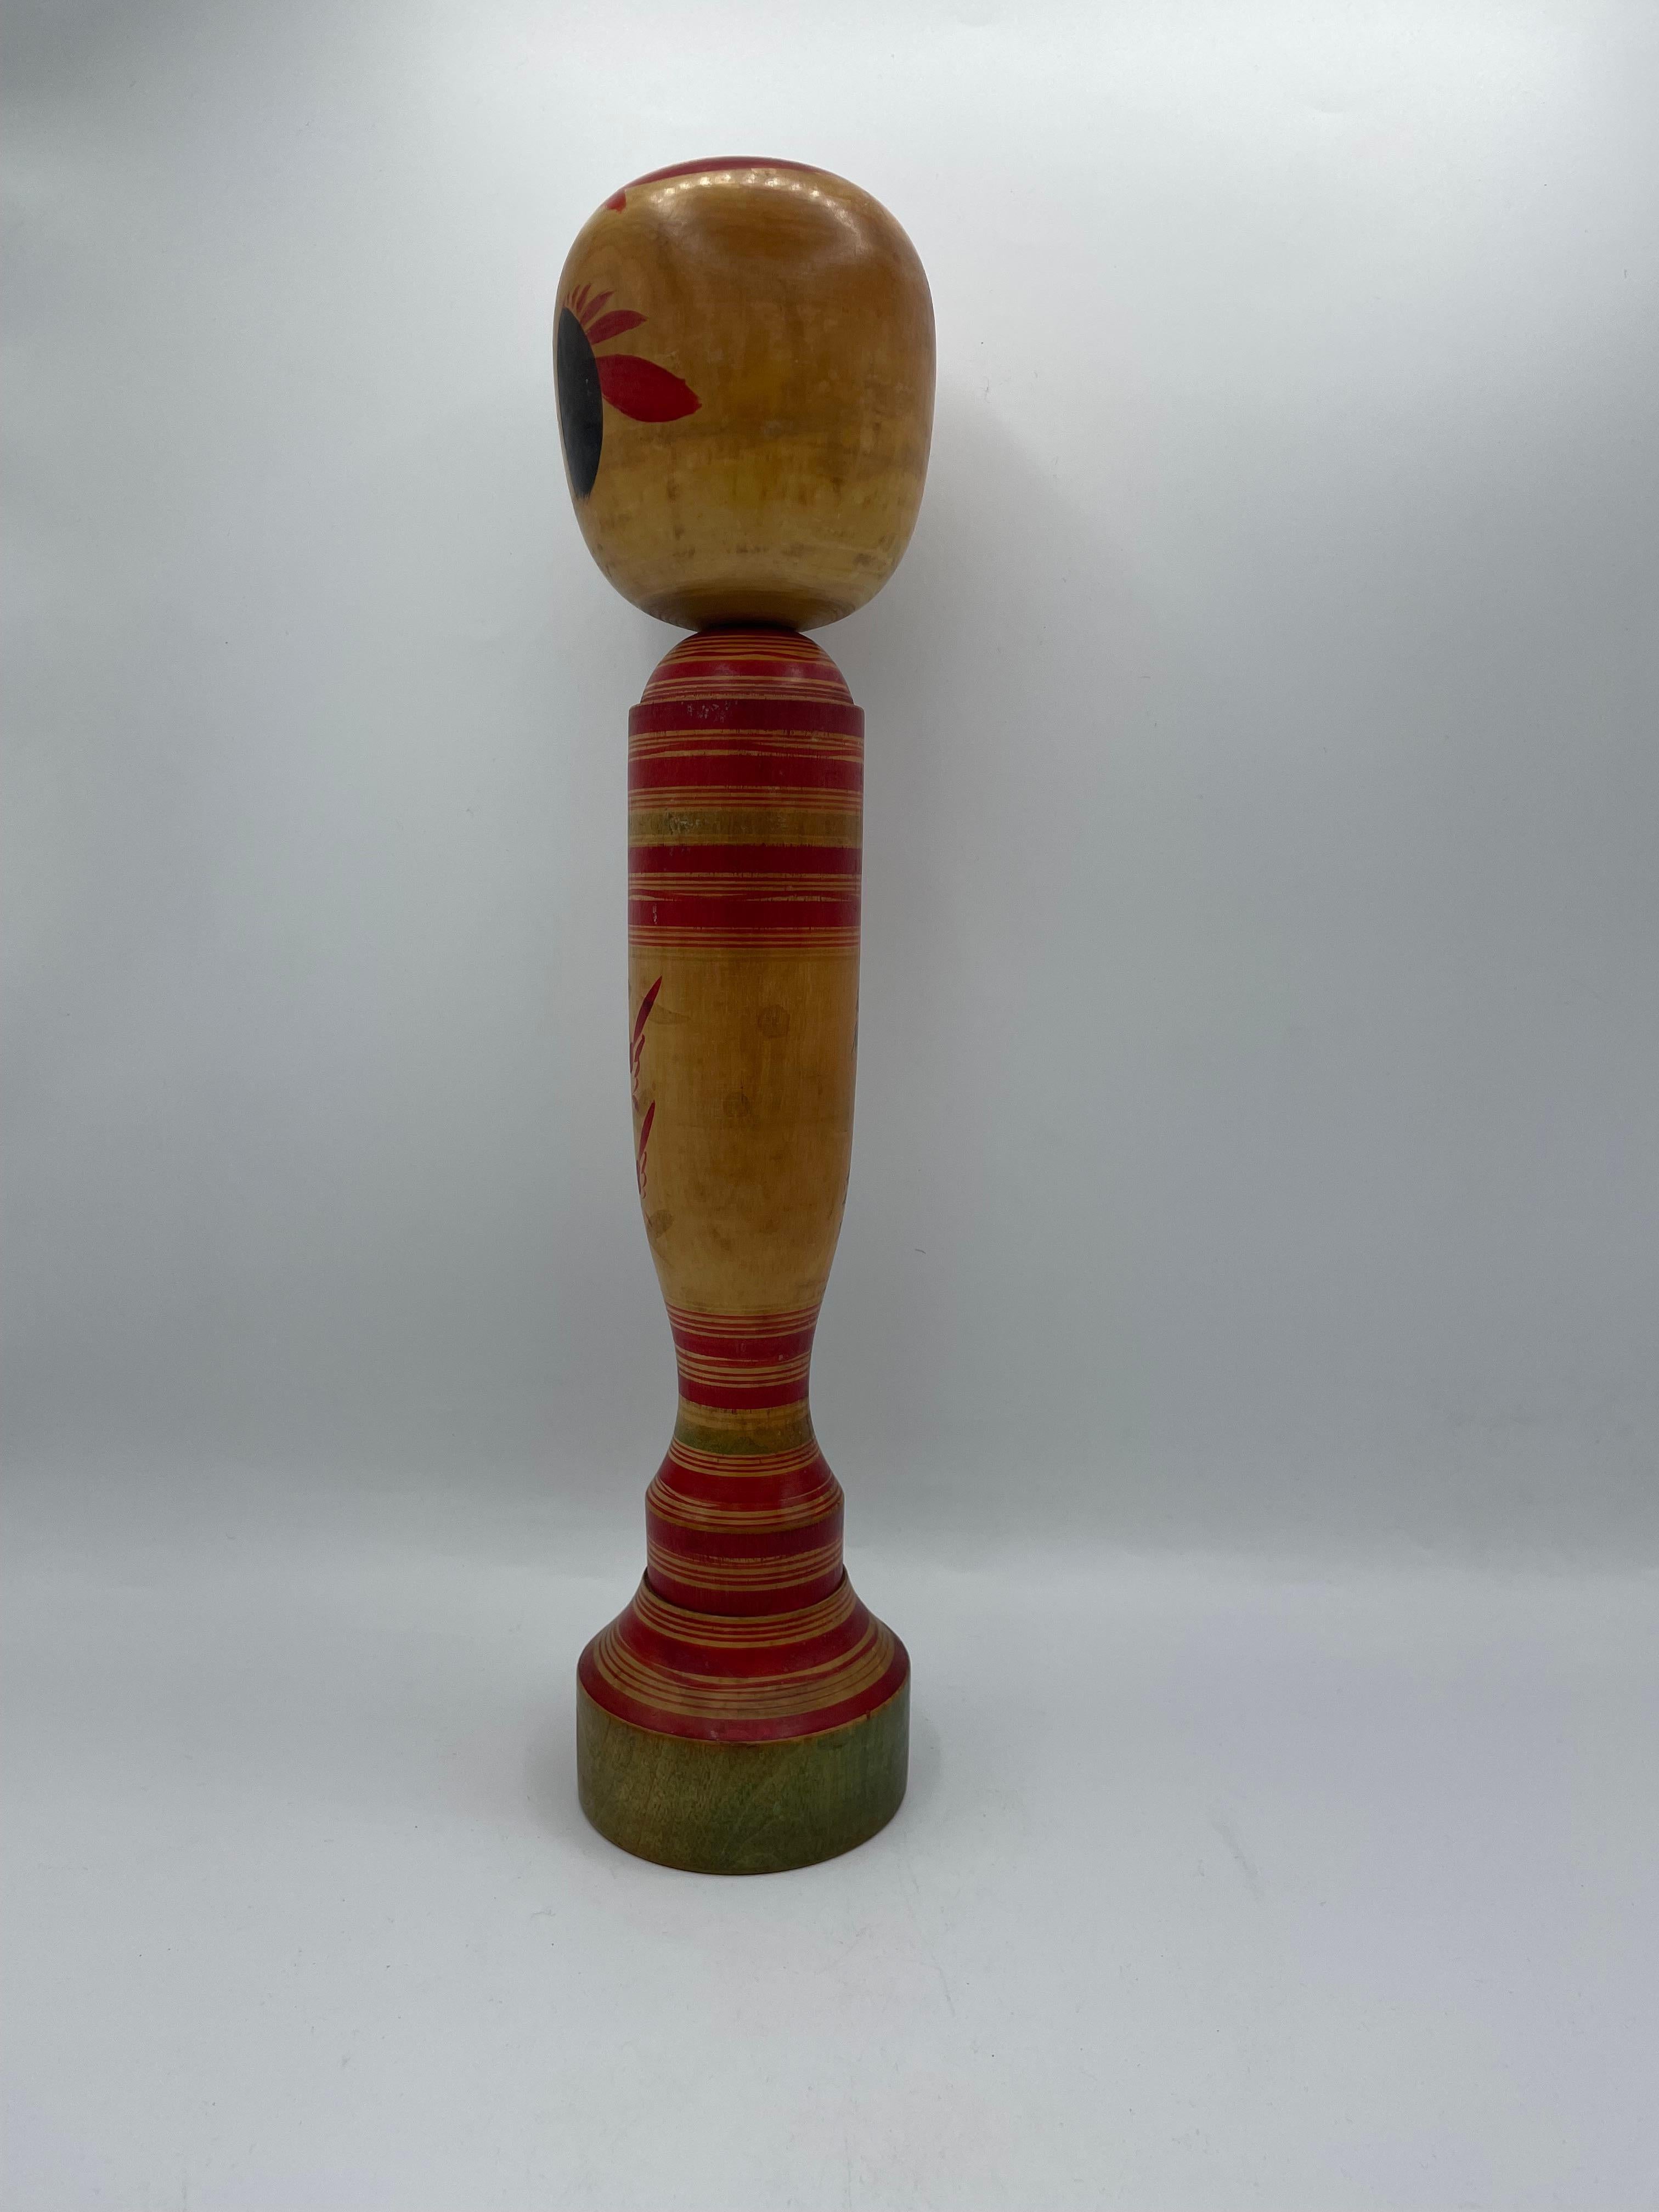 This is a wooden doll which is called Kokeshi in Japanese.
This kokeshi was made in Japan around 1960s by kokeshi artist Kenjiro HIRAGA.
He was born in 17th November 1918. His signature is written on the back of this kokeshi doll.
This kokeshi was